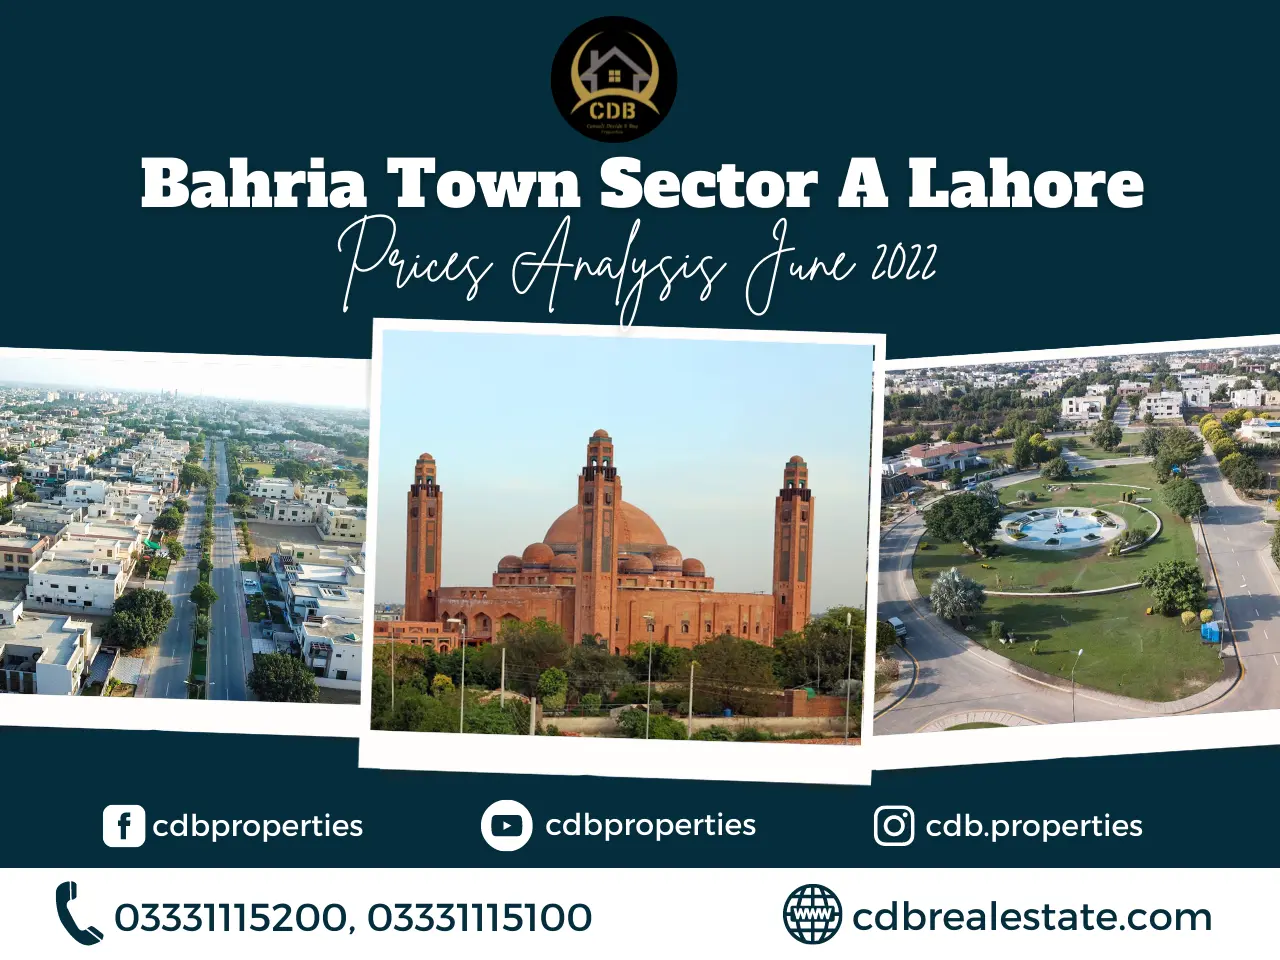 Bahria Town Sector A Lahore